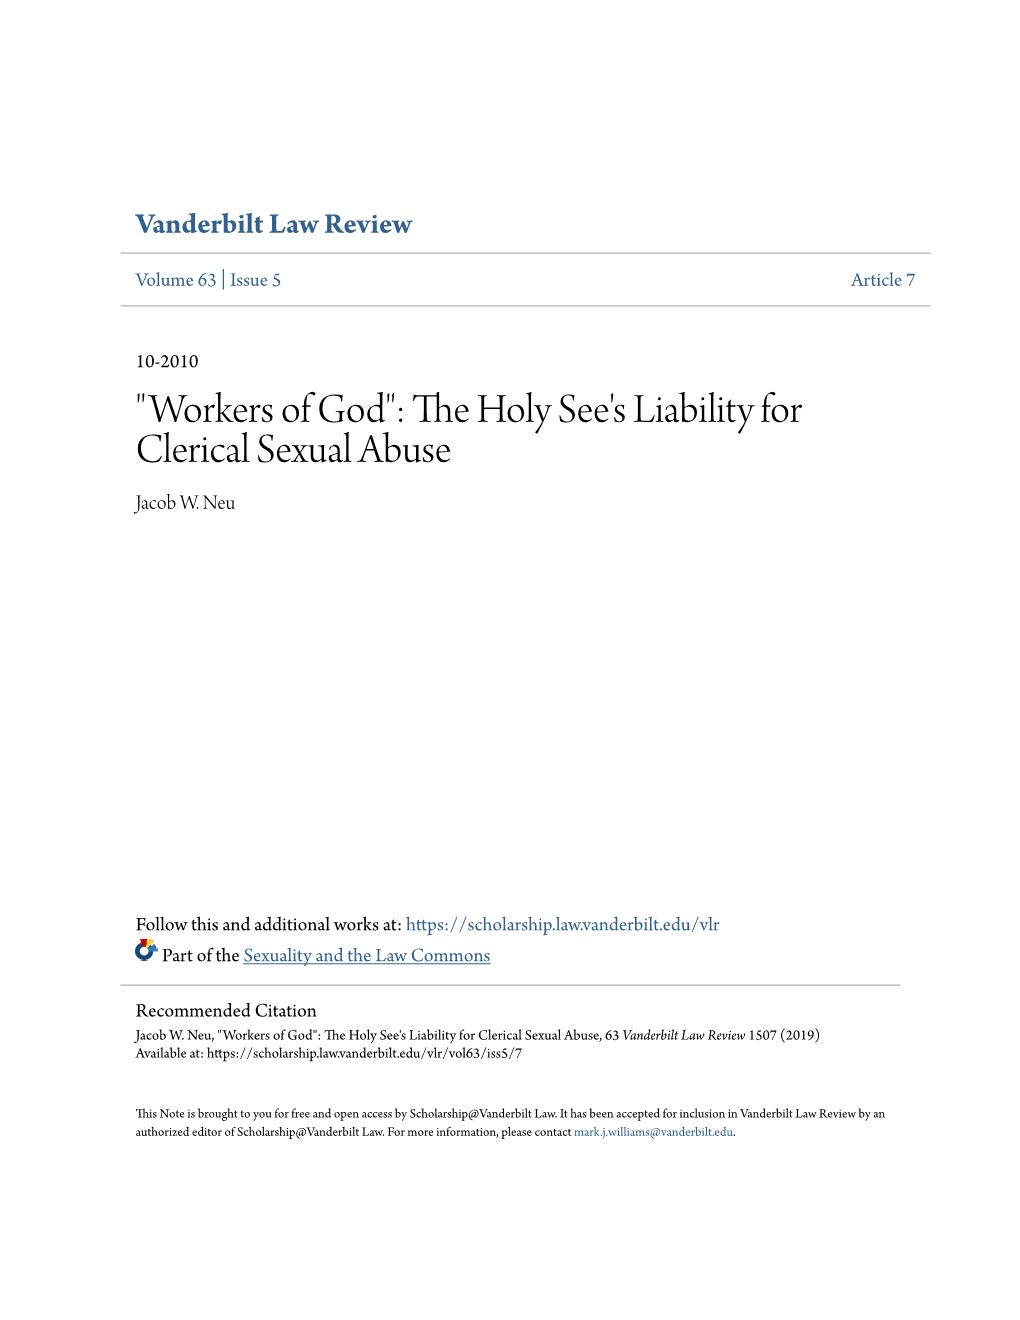 The Holy See's Liability for Clerical Sexual Abuse